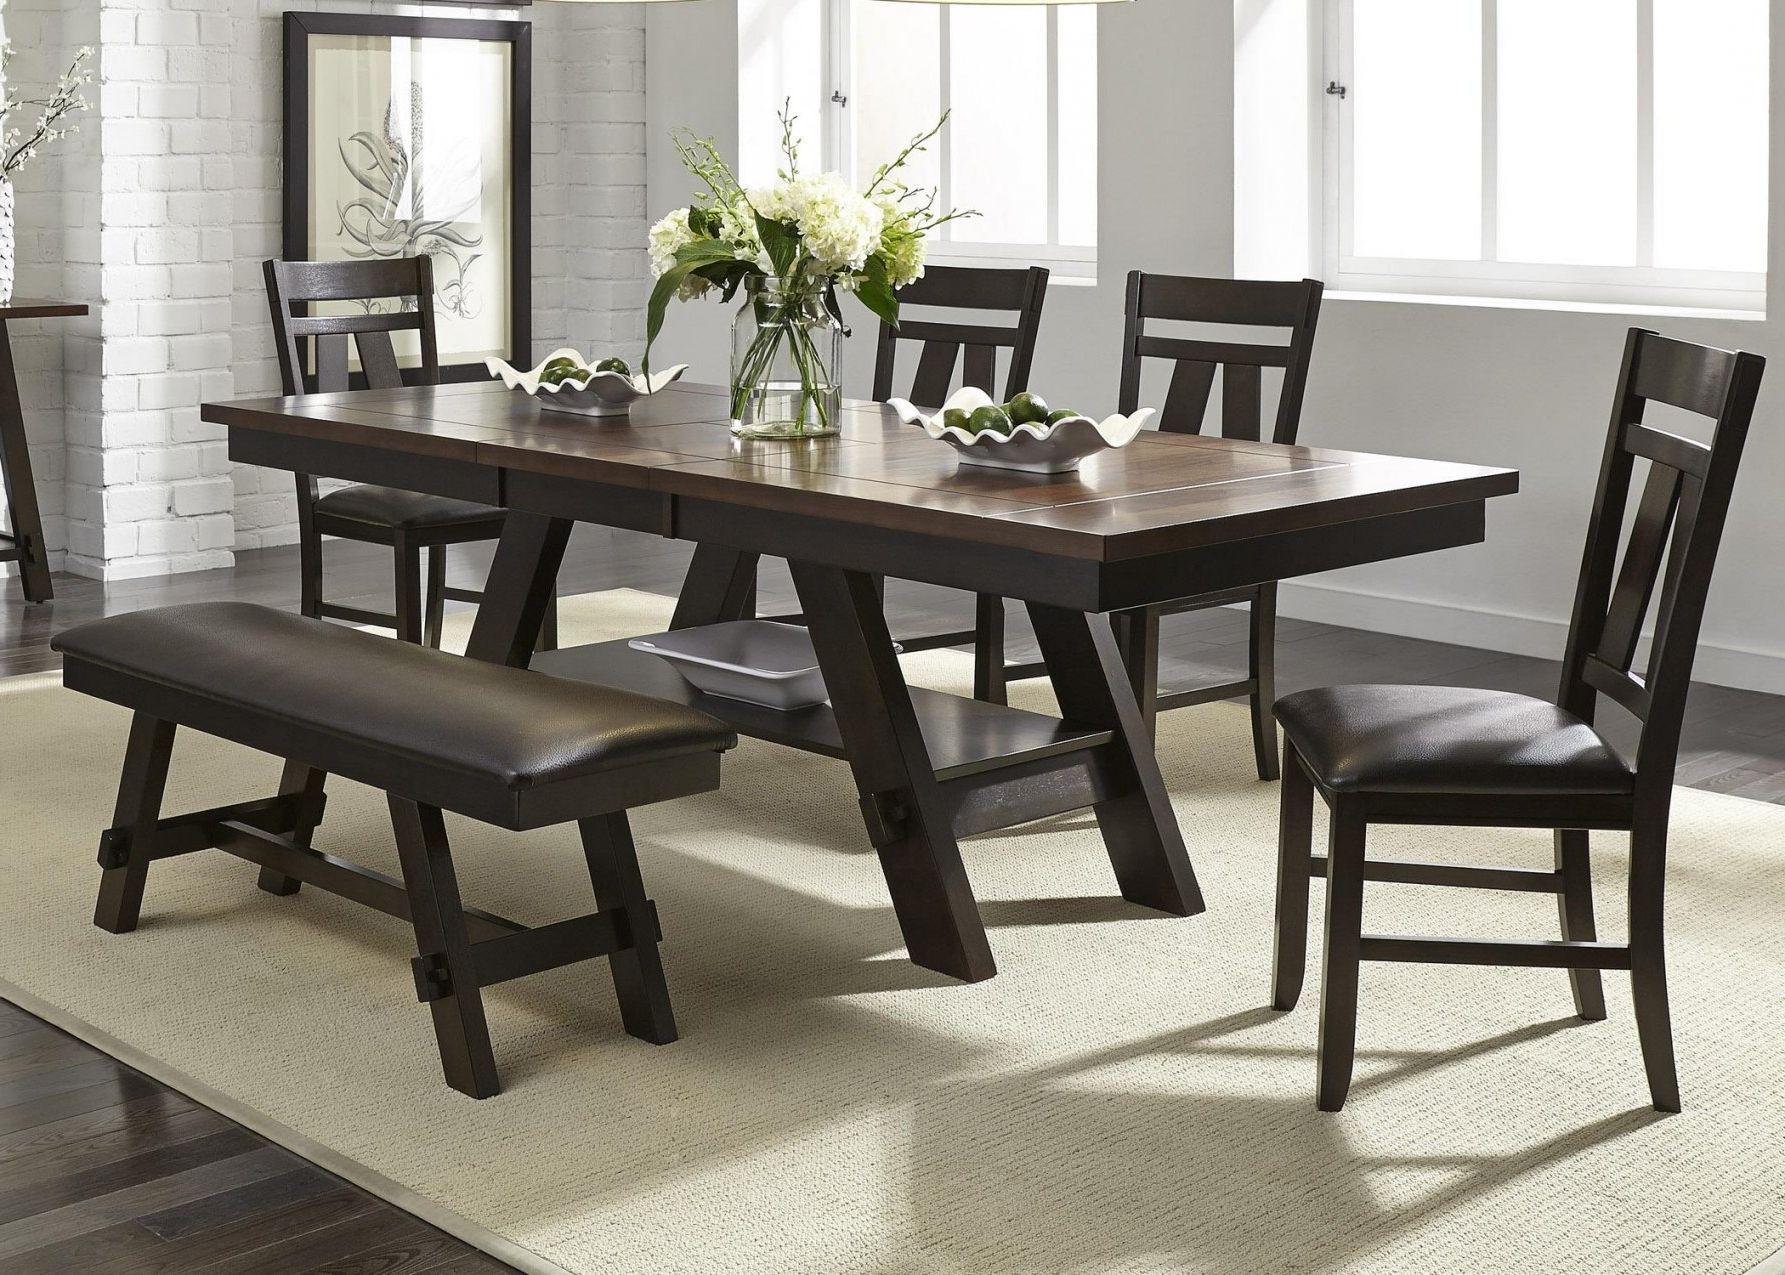 2018 Partridge 6 Piece Dining Sets Inside 6 Piece Dining Table Set – Castrophotos (View 11 of 25)